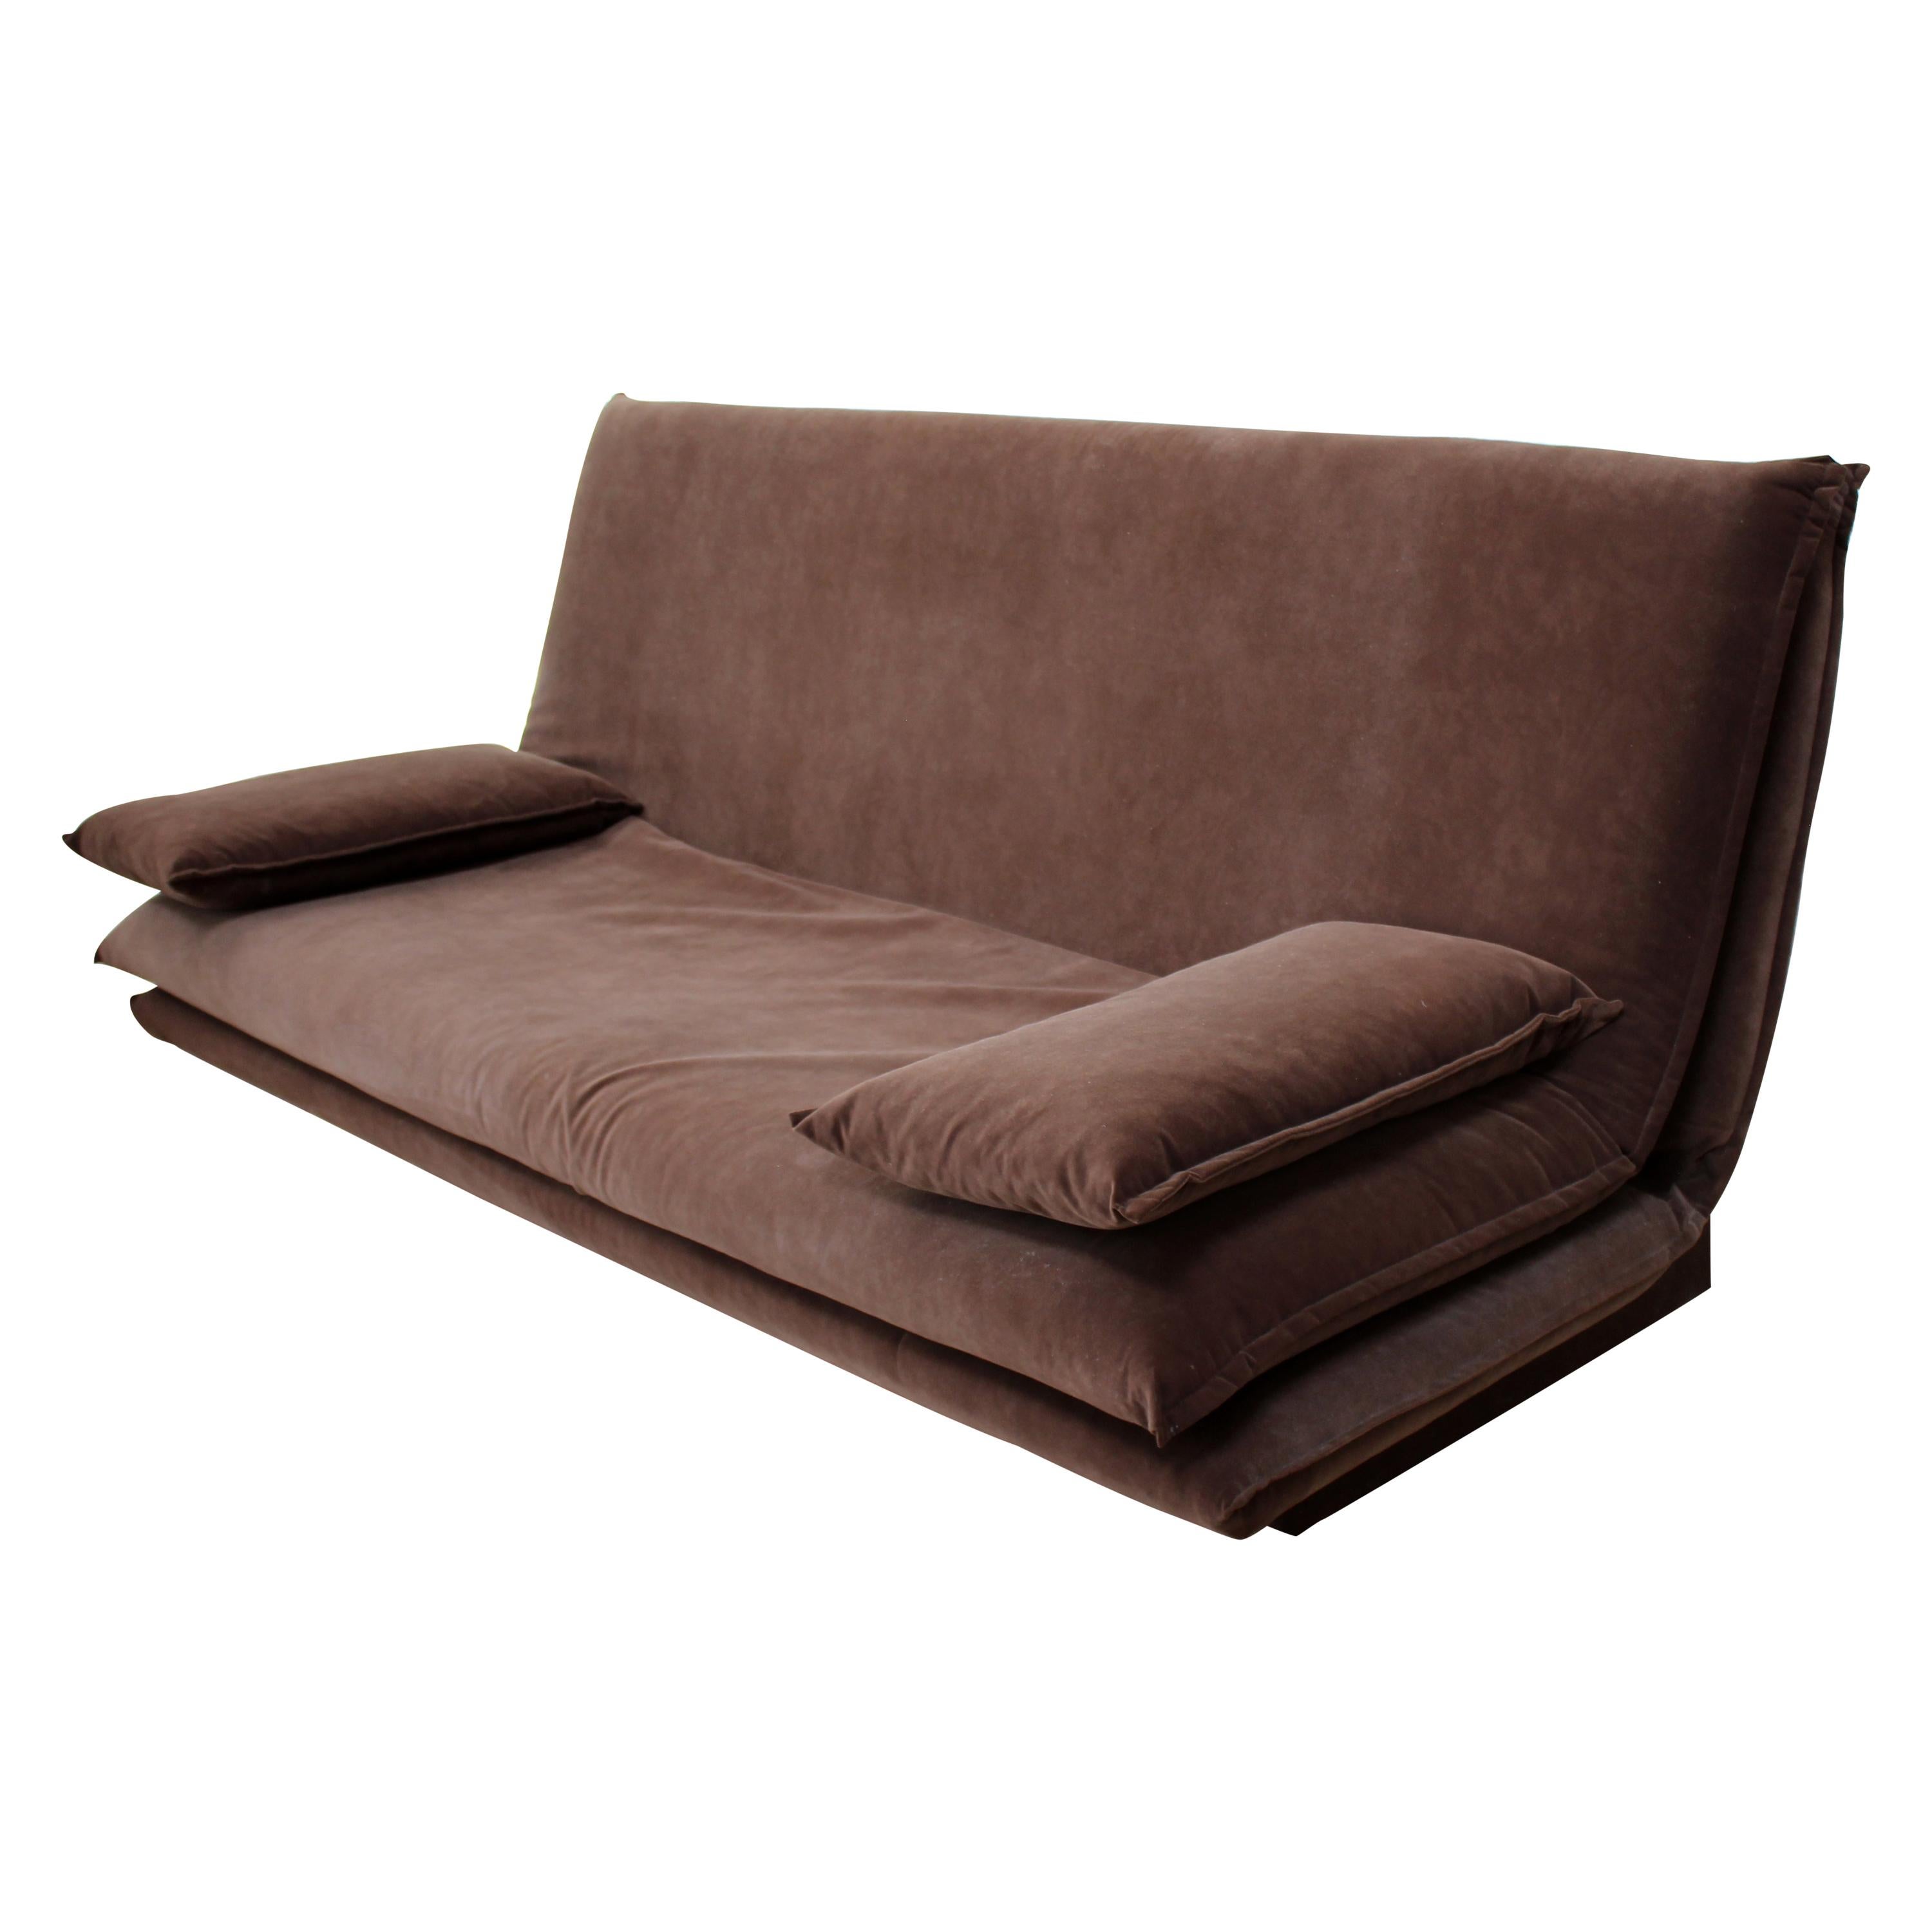 Pro Seda Contemporary Brown Suede Daybed Sofa Fouton